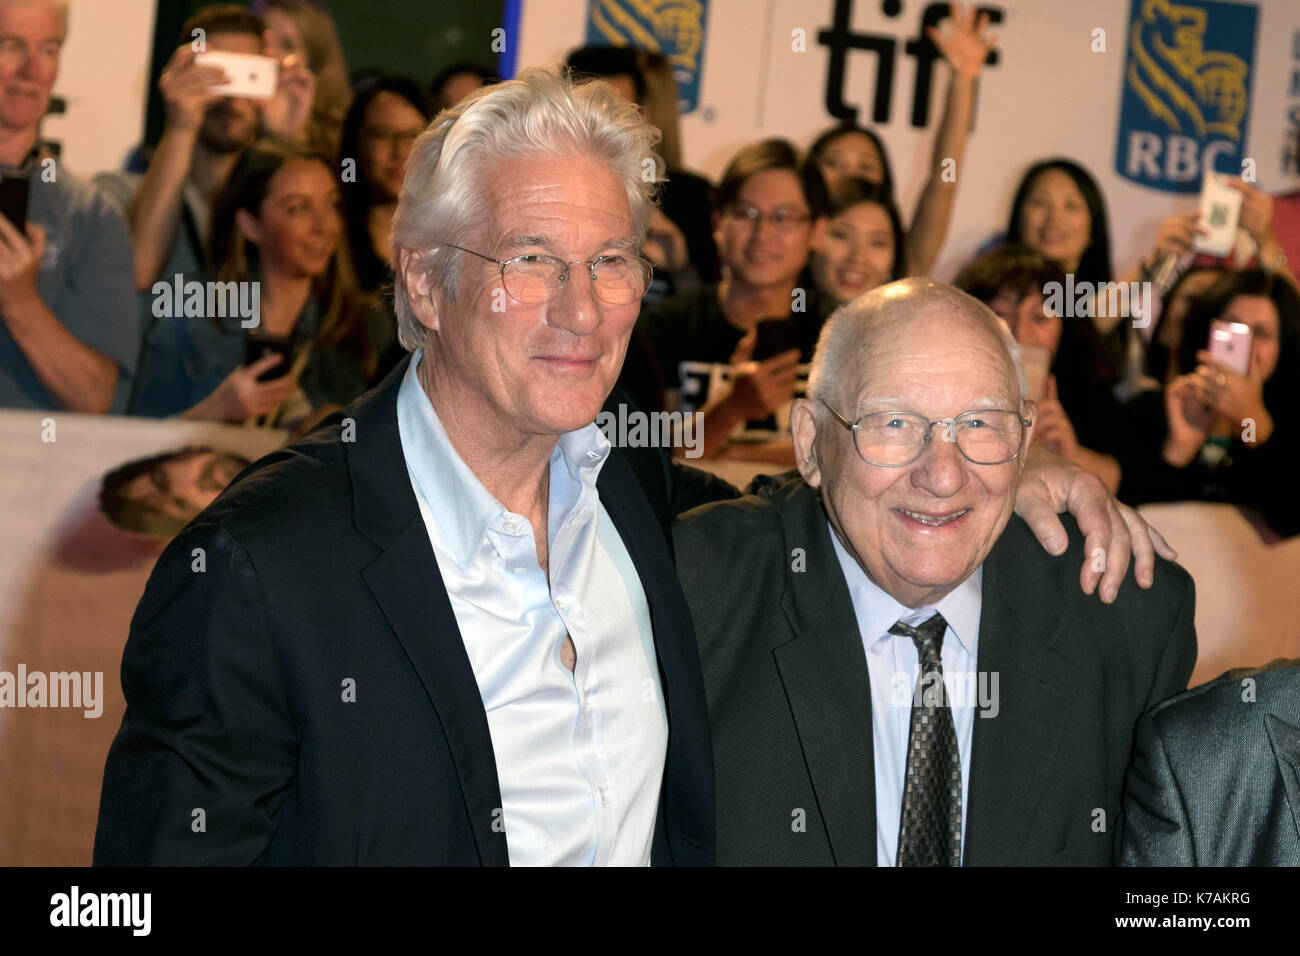 Toronto, Canada. 15th Sep, 2017. Richard Gere and his father Homer George Gere attend the premiere of 'Three Christs' during the 42nd Toronto International Film Festival, tiff, at Roy Thomson Hall in Toronto, Canada, on 14 September 2017. - NO WIRE SERVICE - Photo: Hubert Boesl//dpa/Alamy Live News Stock Photo